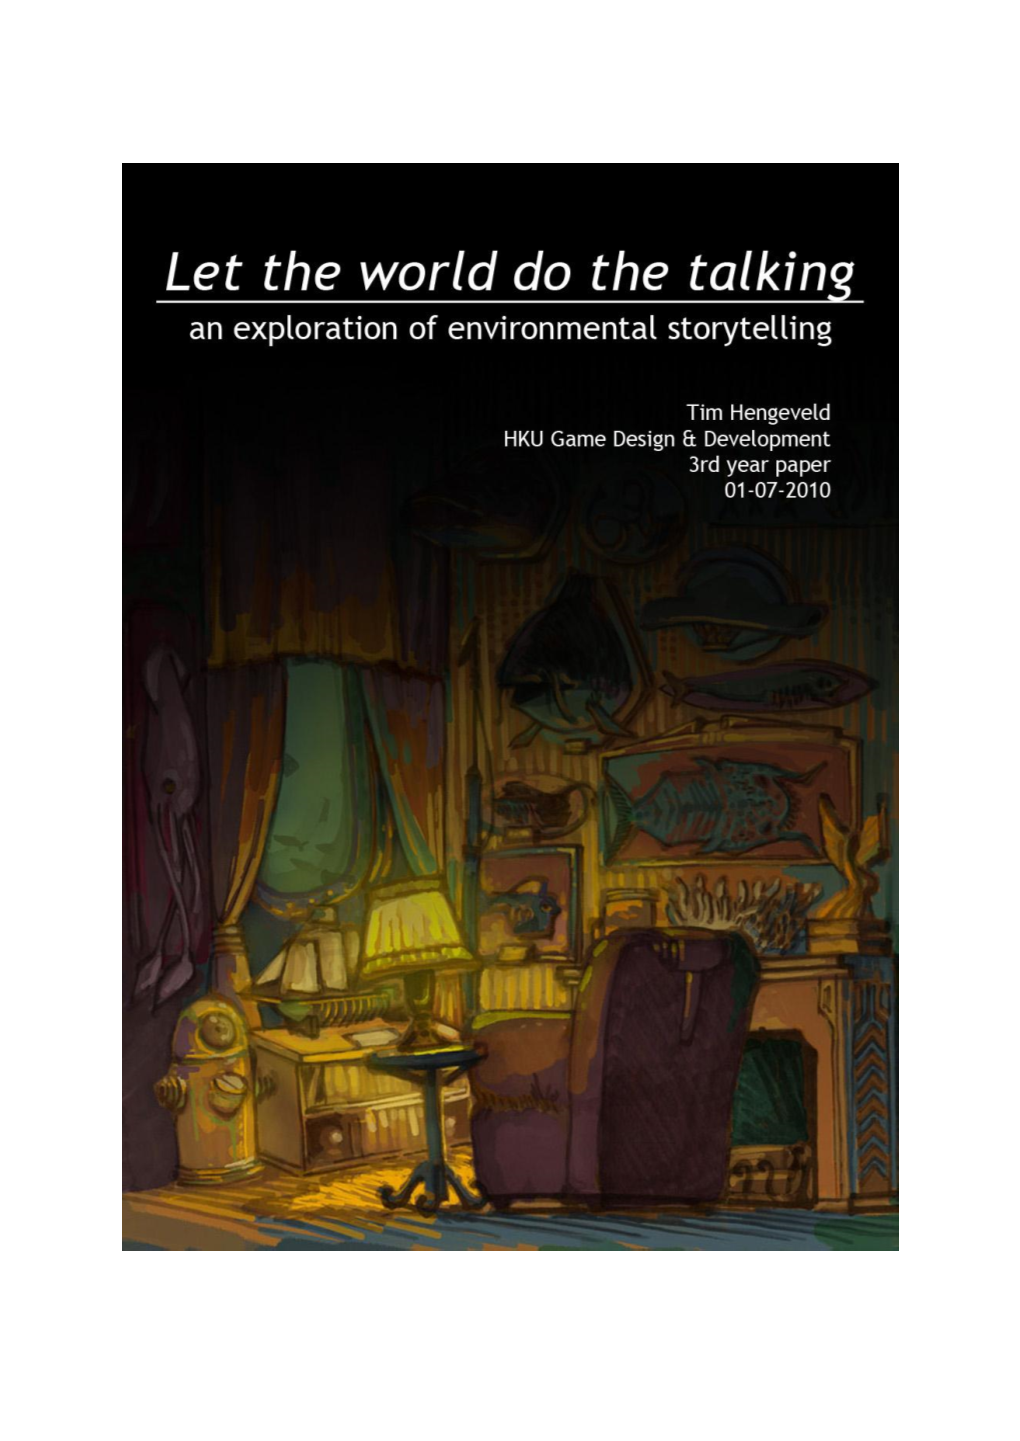 Let the World Do the Talking by Tim Hengeveld